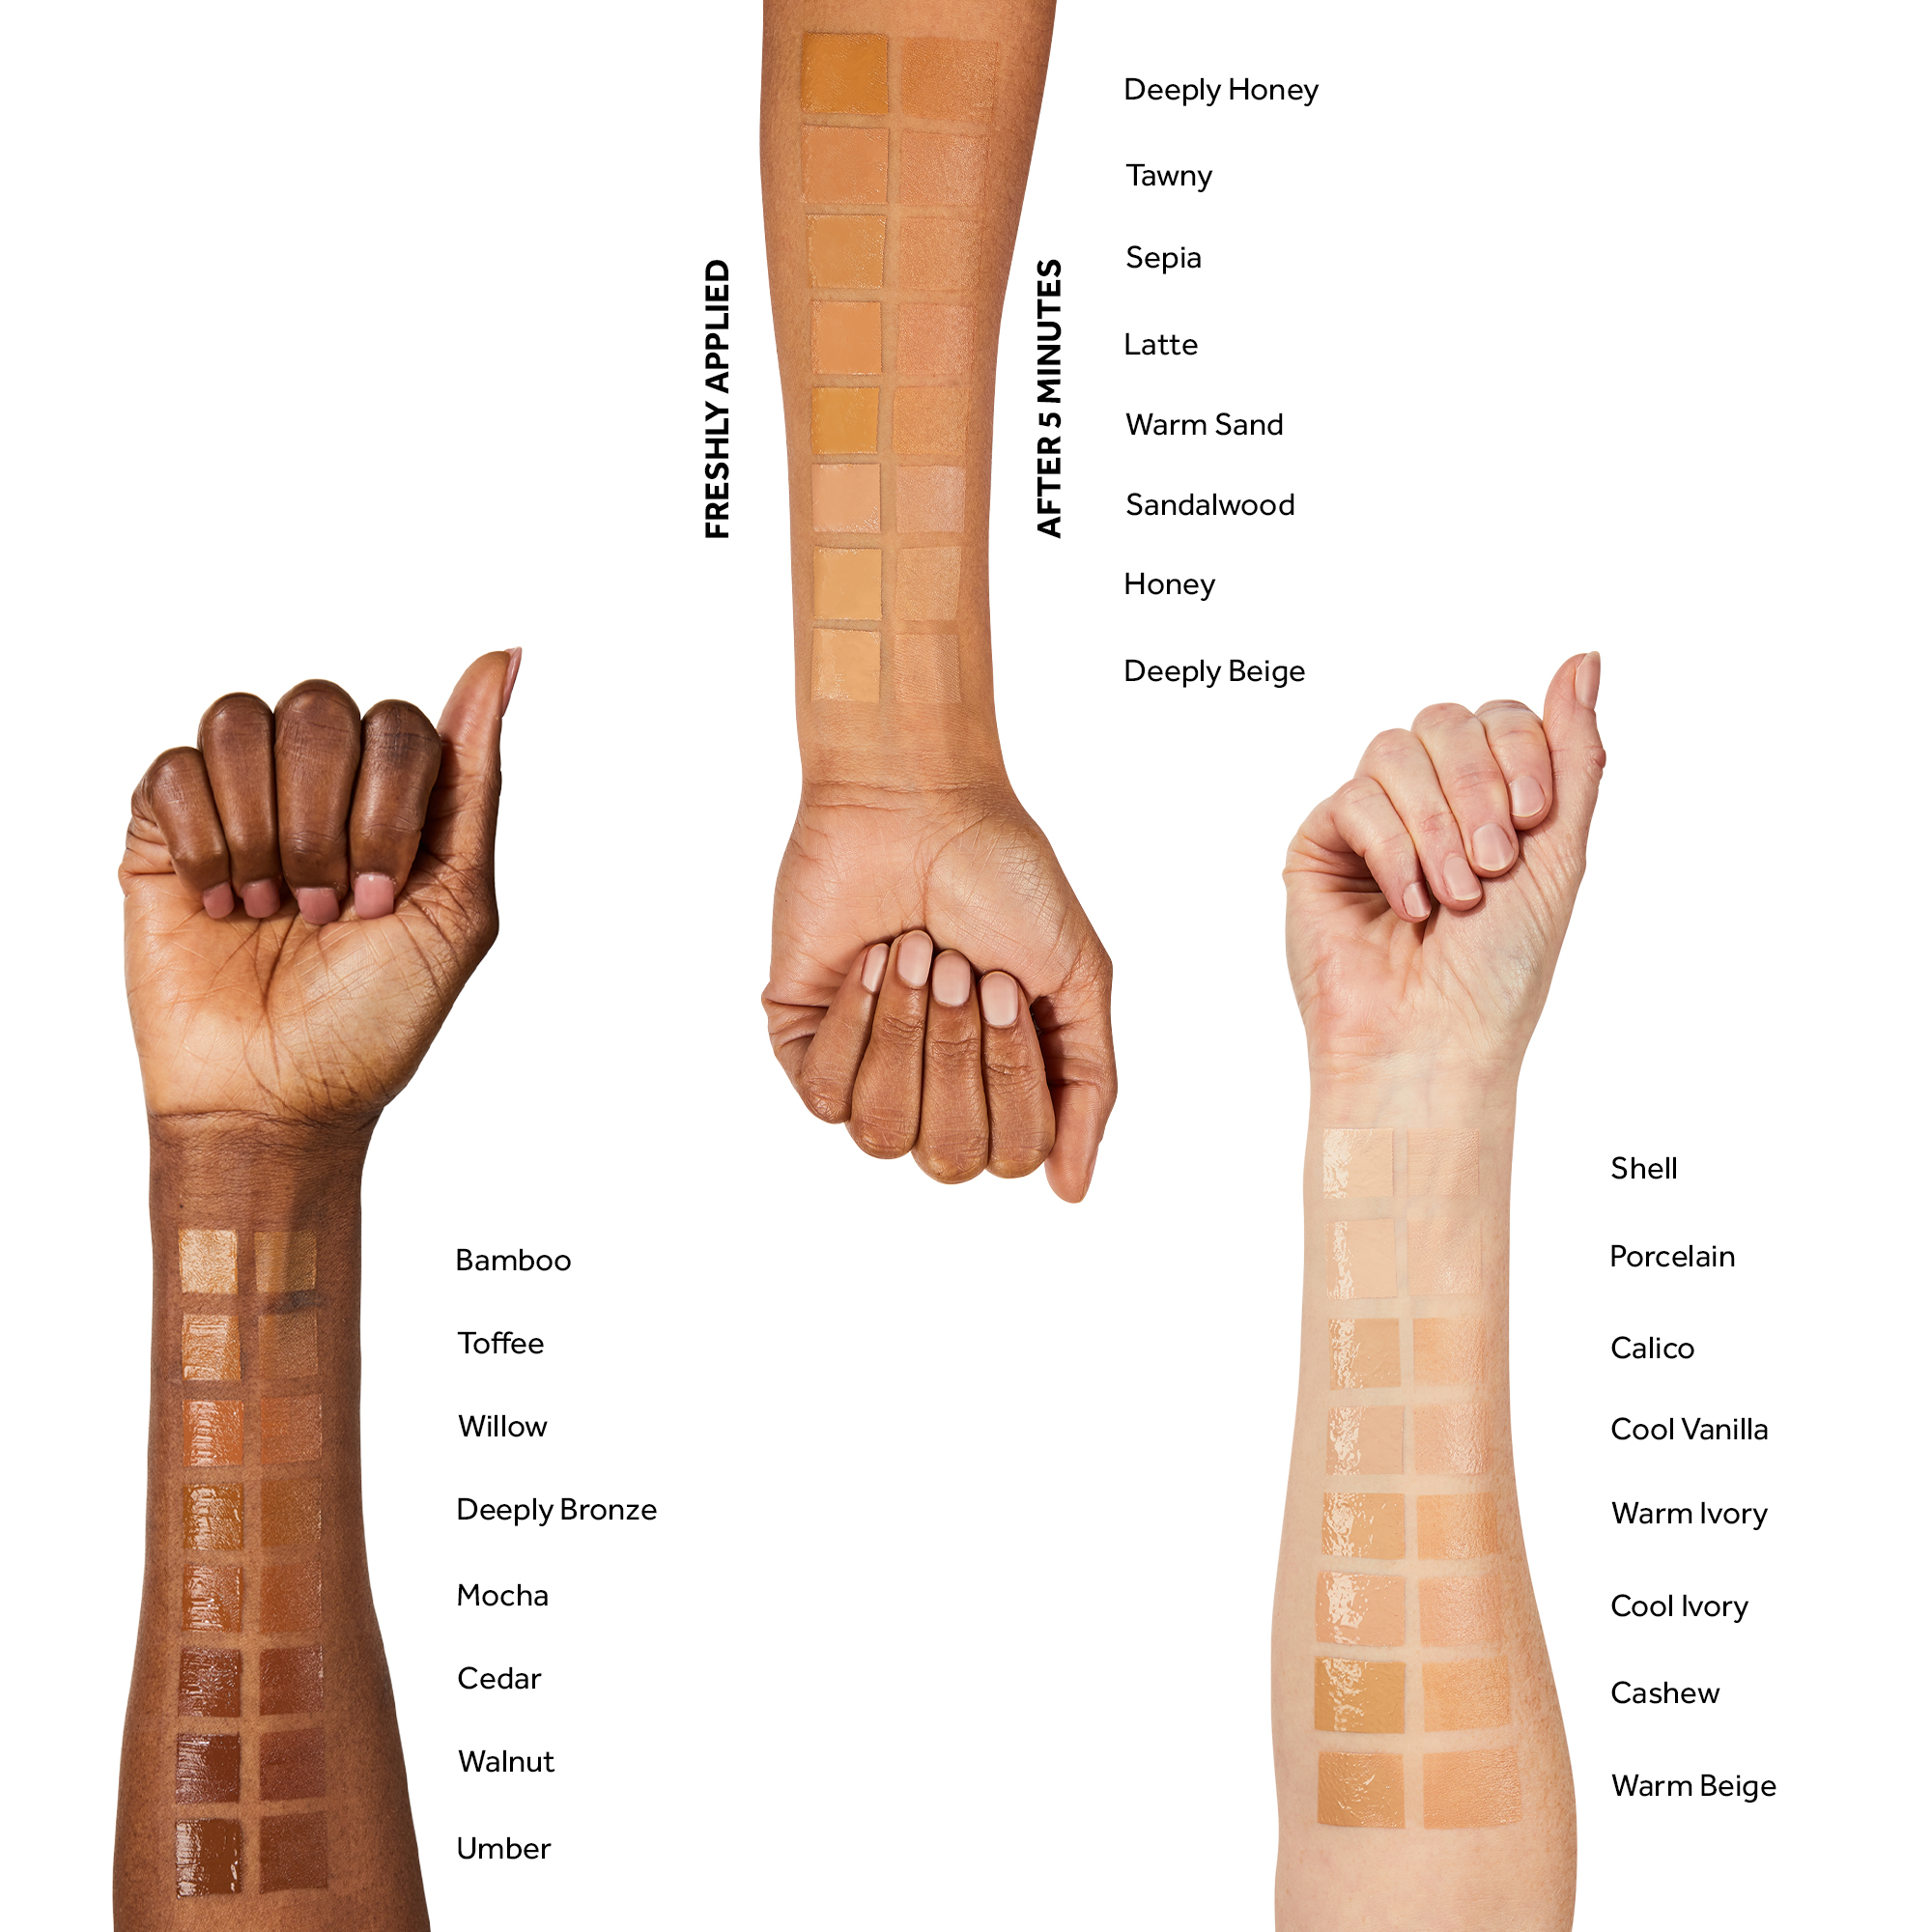 The image shows the different shades applied on arms with different skin tones. There are three arms in total and the shades are as follows, Bamboo, 
              Toffee, Willow, Deeply Bronze, Mocha, Cedar, Walnut, Umber, FRESHLY APPLIED AFTER 5 MINUTES, Deeply Honey, Tawny, Sepia, Latte, Warm Sand, Sandalwood, Honey, Deeply Beige, Shell, Porcelain, Calico, Cool Vanilla, Warm Ivory, Cool Ivory, Cashew, Warm Beige